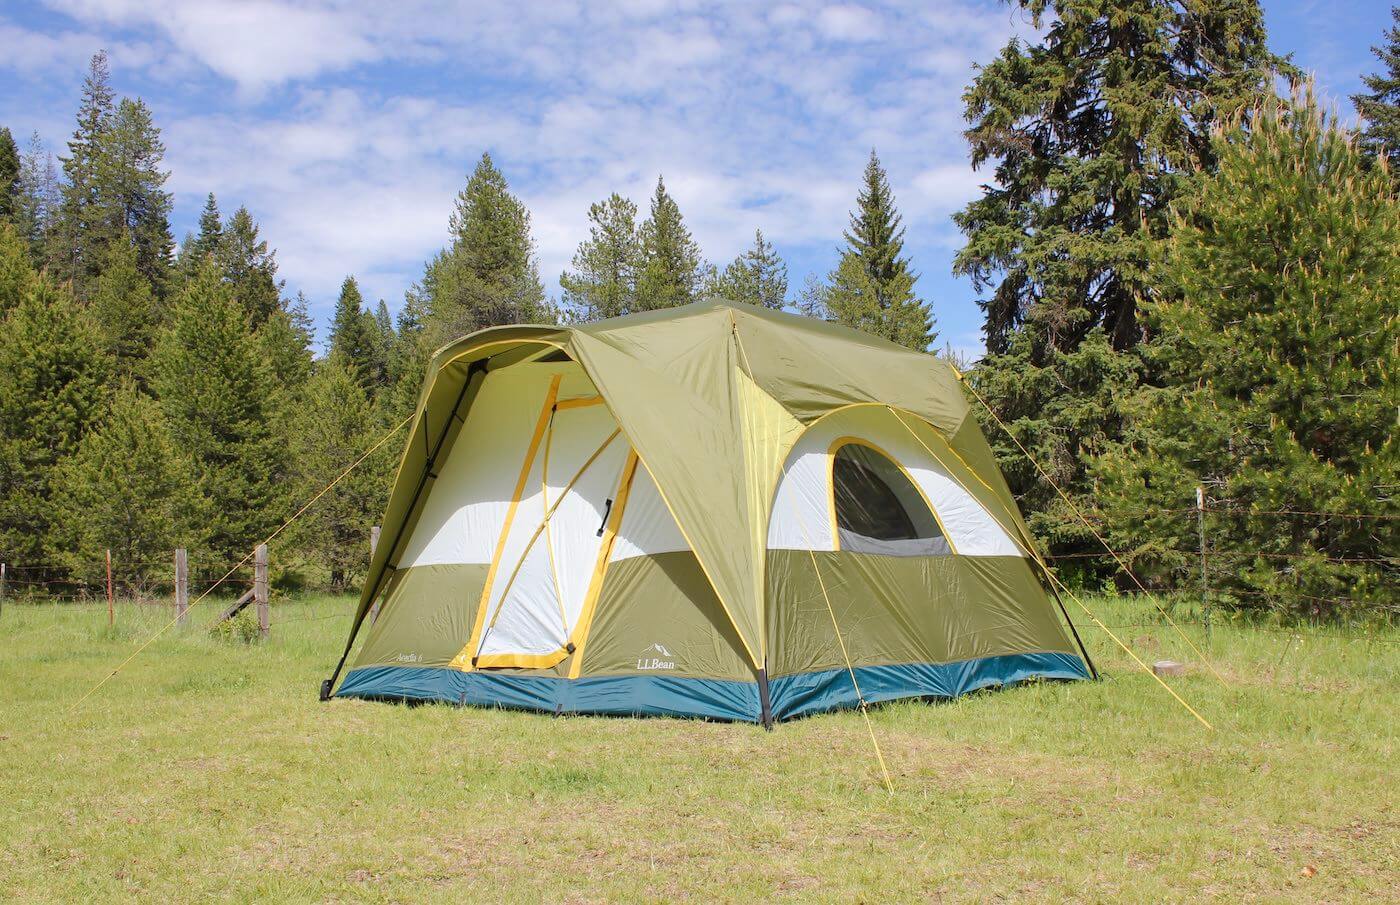 This photo shows the L.L.Bean Acadia 6-Person Camping Tent.